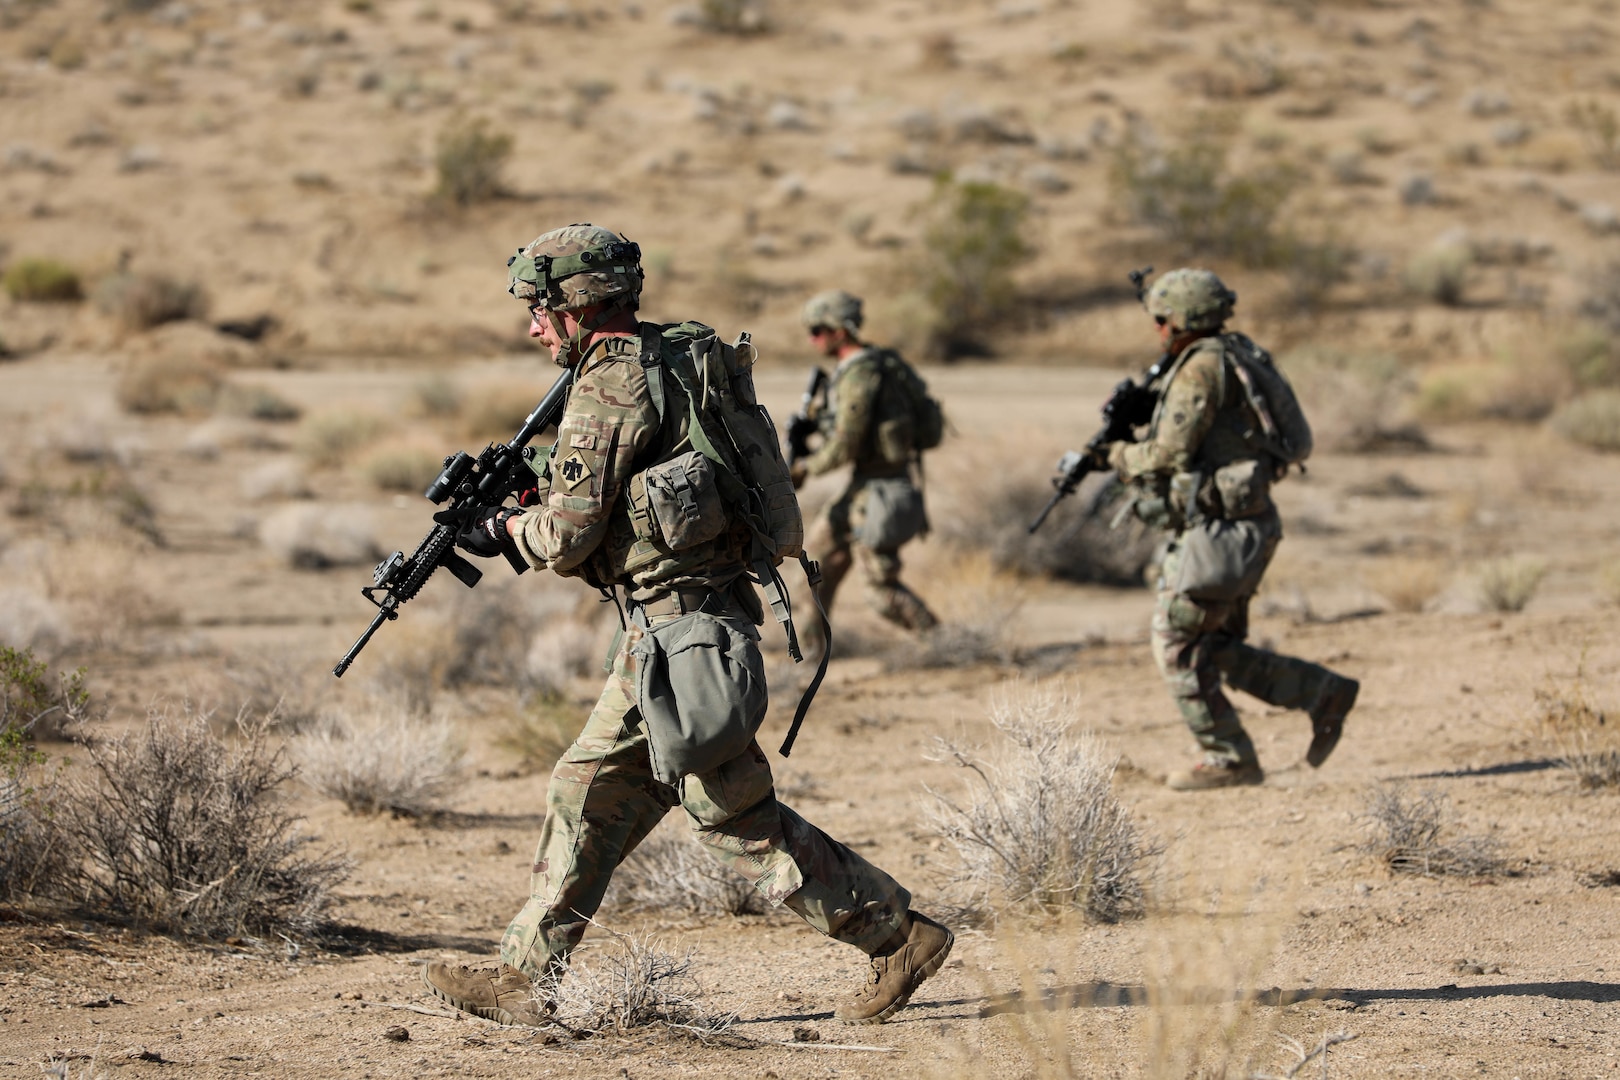 Soldiers with the 45th Infantry Brigade Combat Team, Oklahoma Army National Guard, move through the desert during a live-fire exercise at the National Training Center in Fort Irwin, California, July 24, 2021.